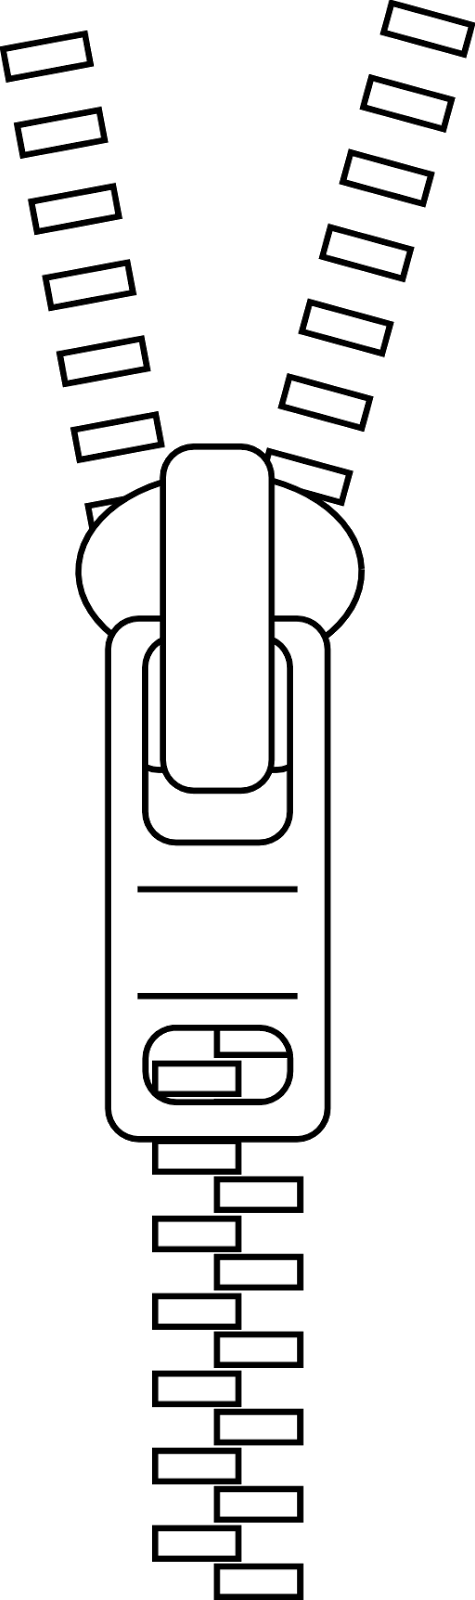 Zipper Black And White Png & Free Zipper Black And White.png.